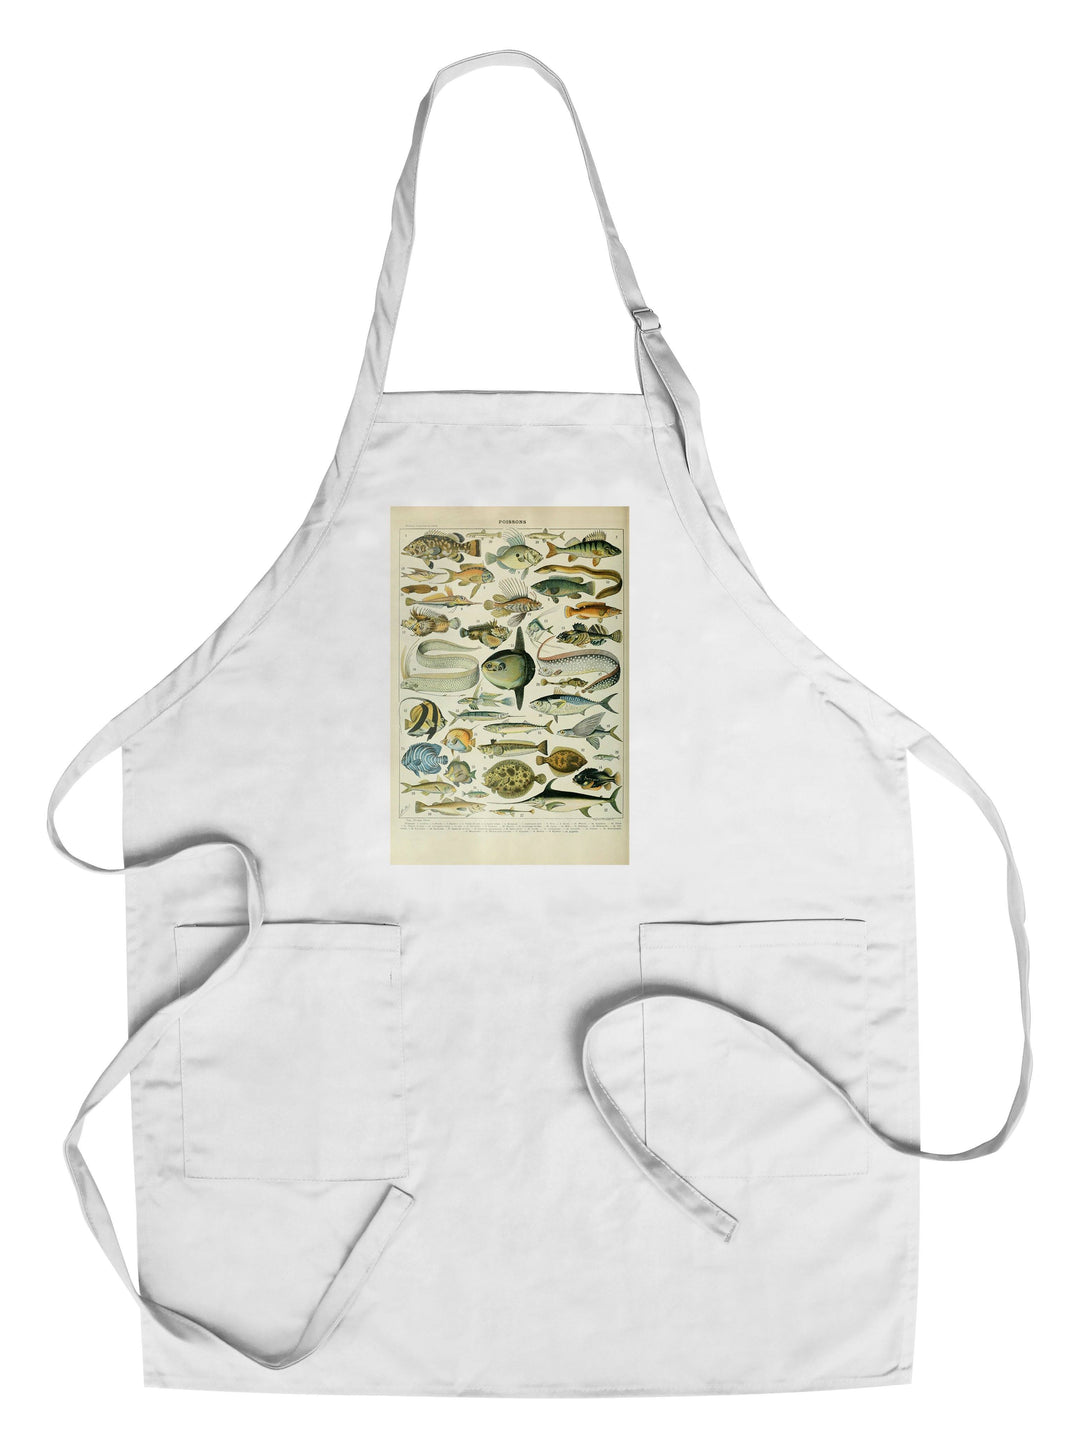 Fish, A, Vintage Bookplate, Adolphe Millot Artwork, Towels and Aprons Kitchen Lantern Press Chef's Apron 